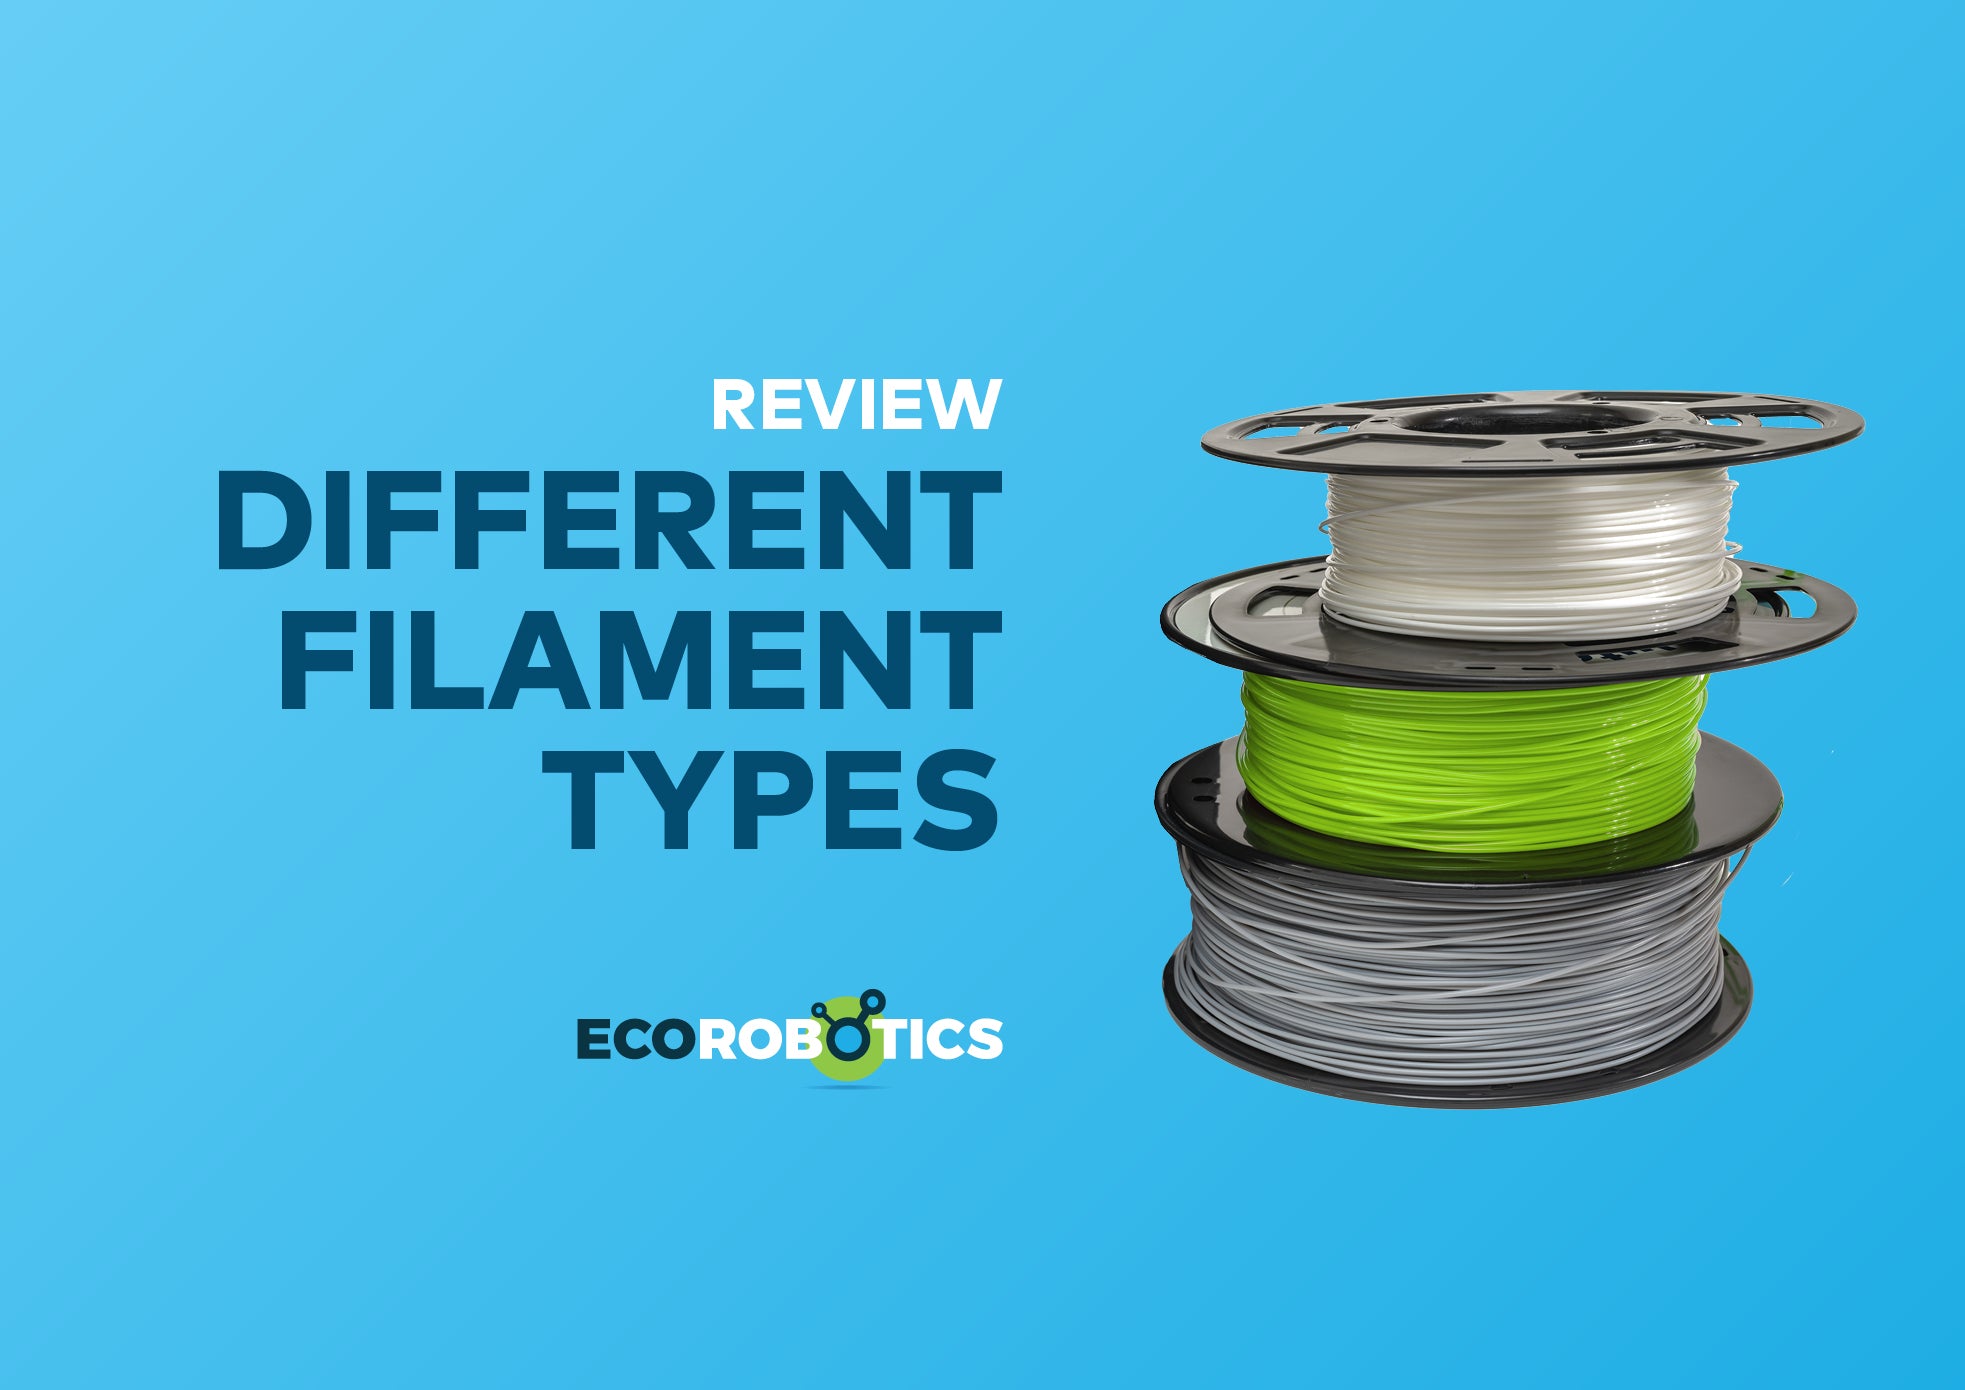 REVIEW OF DIFFERENT FILAMENT TYPES